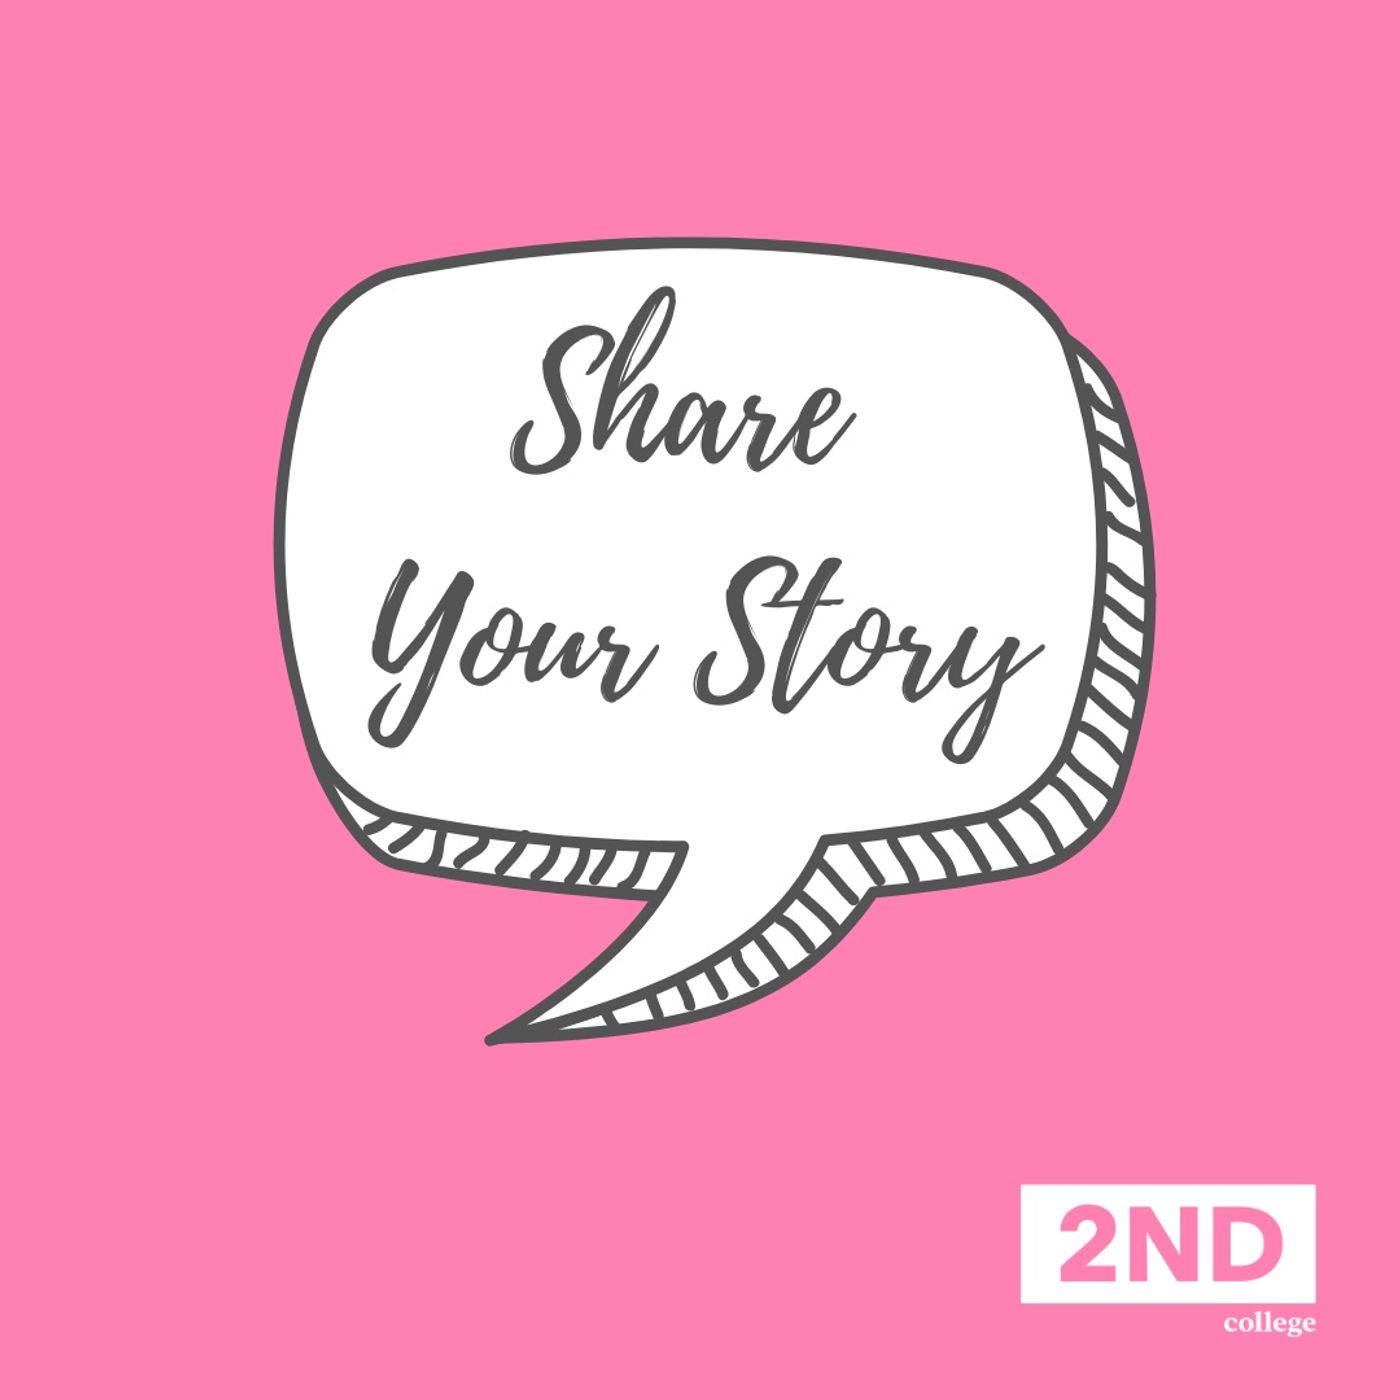 Share Your Story Night